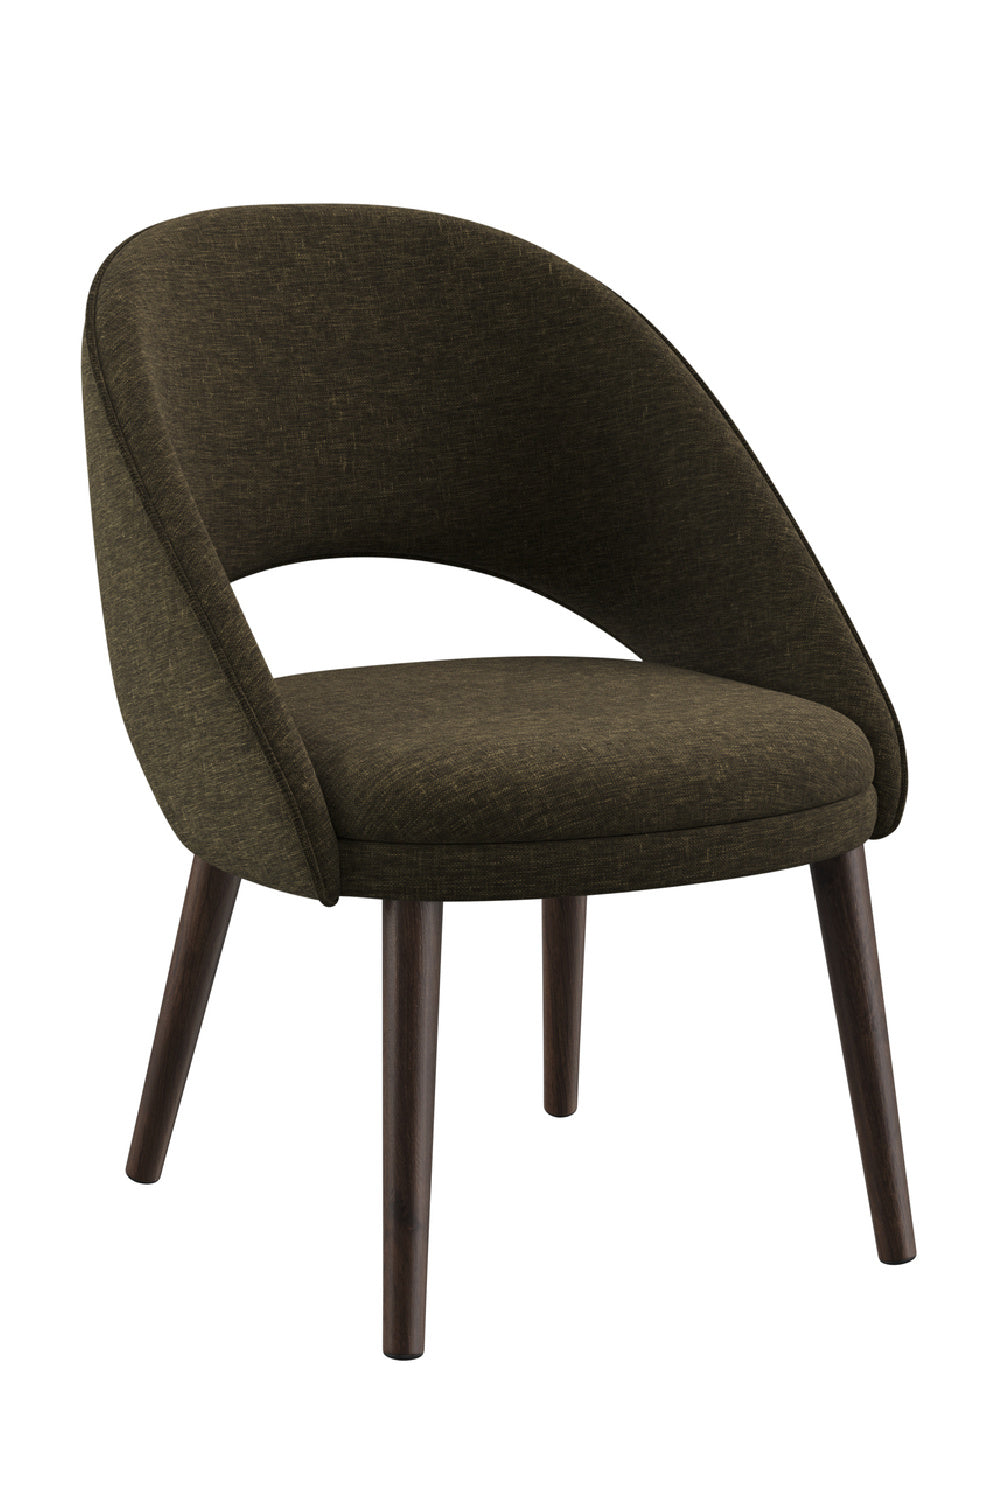 Cut-Out Back Dining Chair | Dome Deco Bend Low | Oroa.com